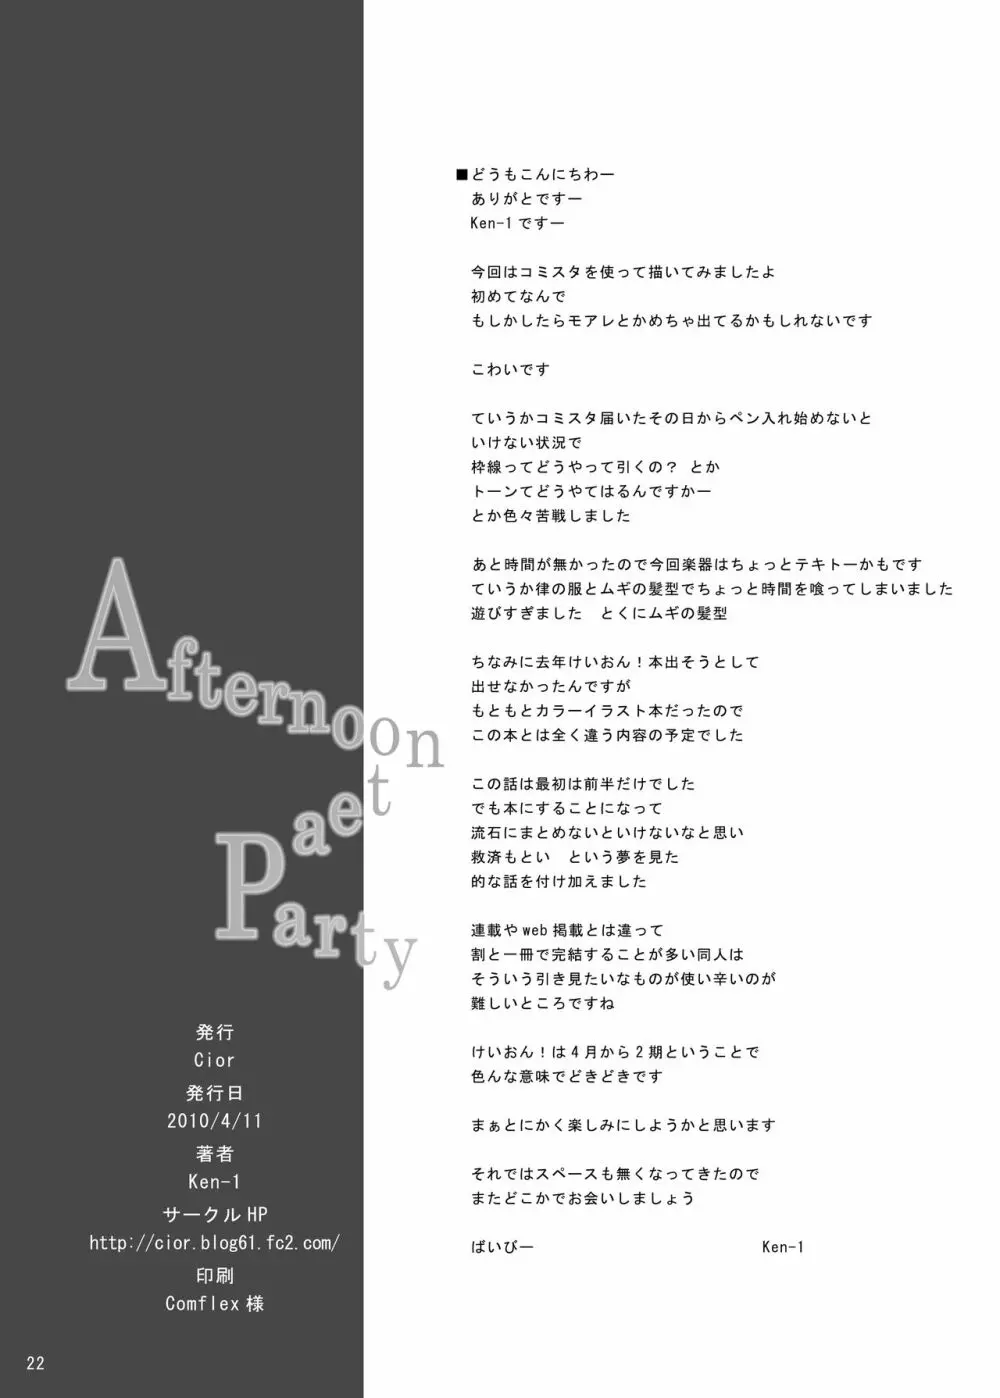 Afternoon tea Party 21ページ